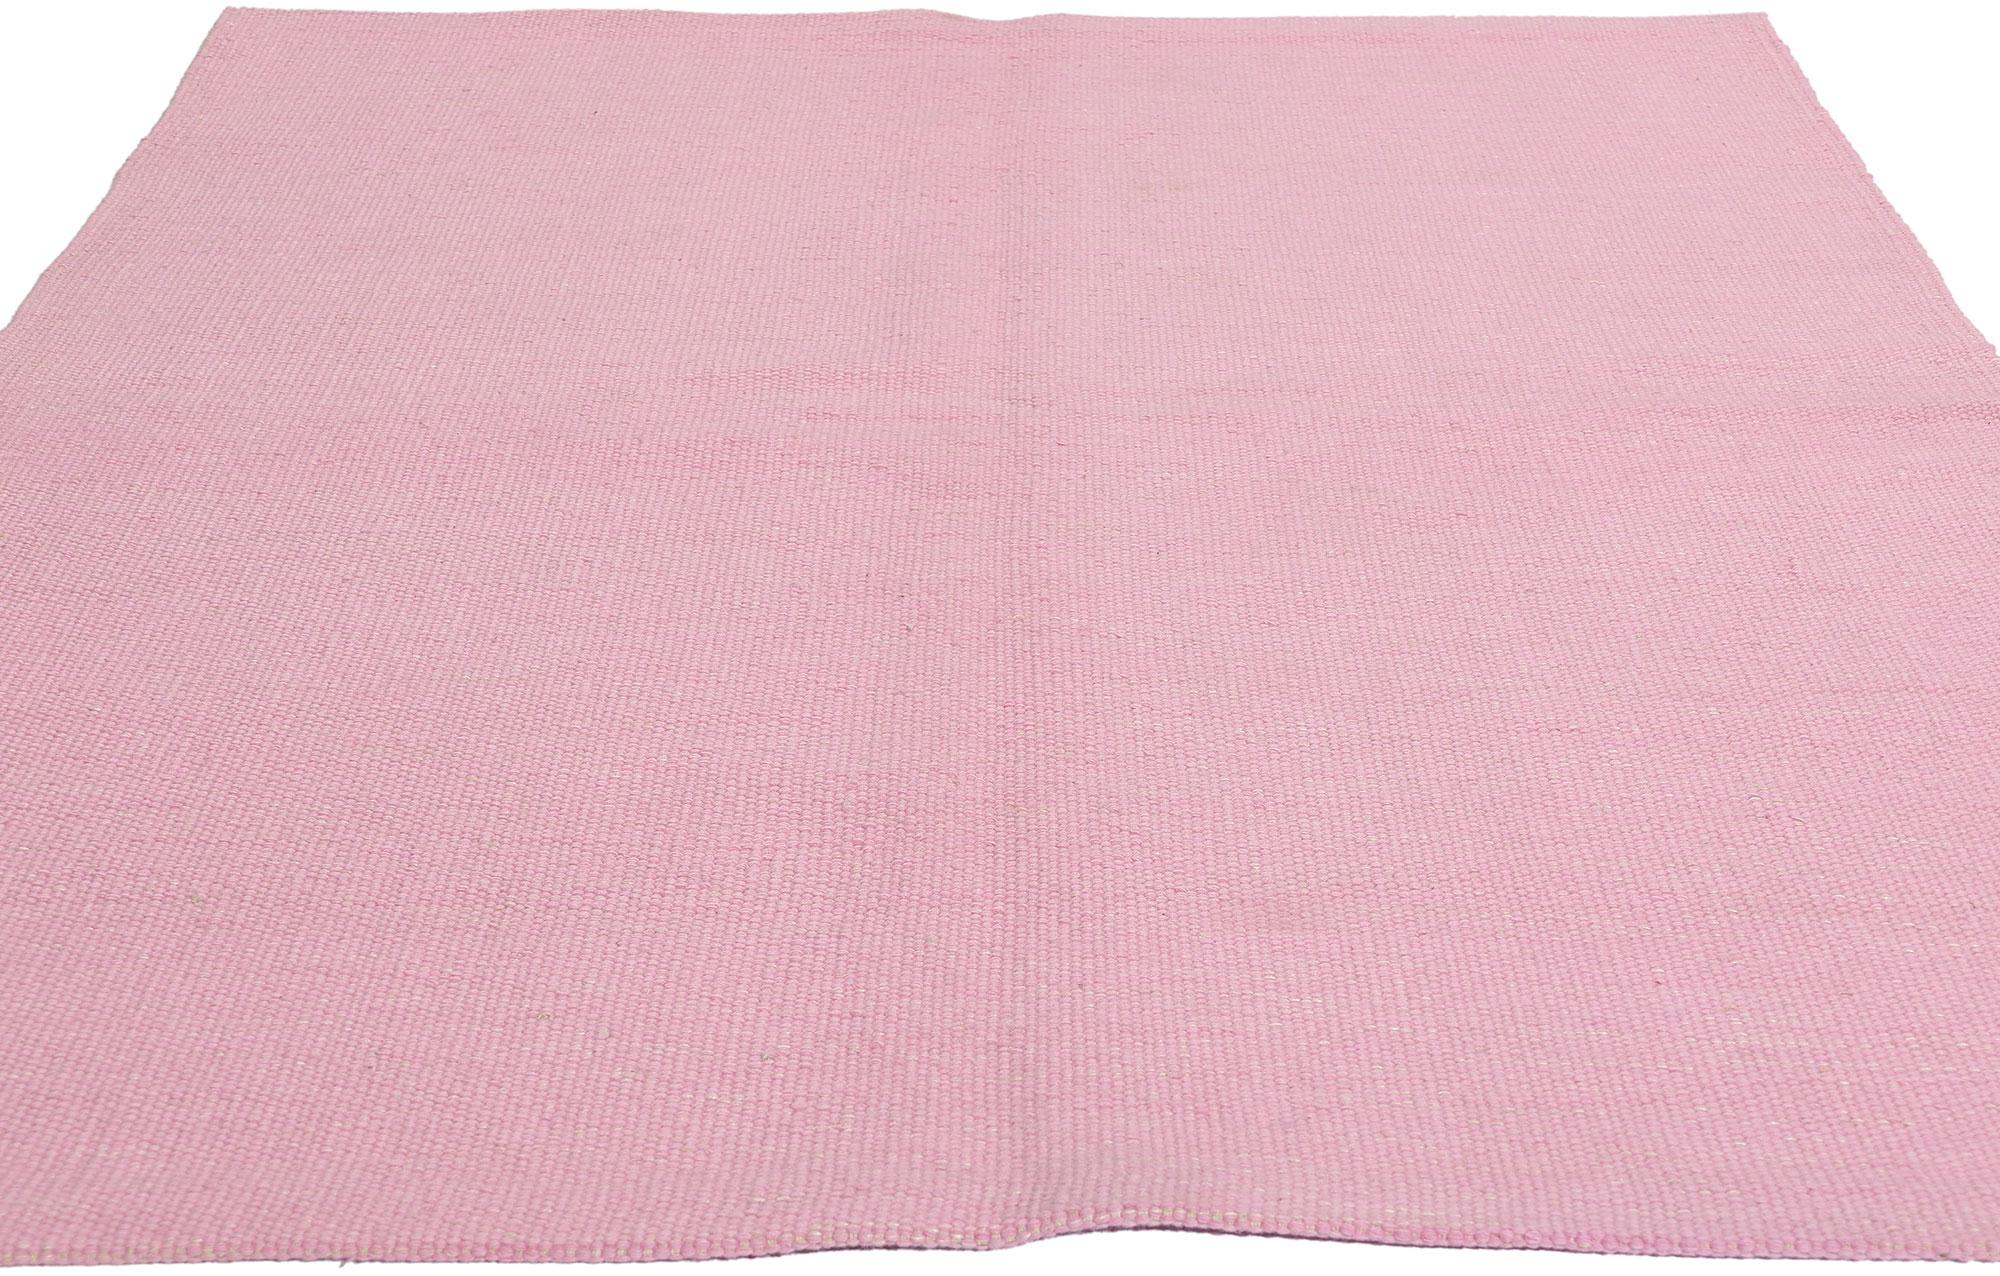 Hand-Woven New Swedish Inspired Pink Kilim Rug with Scandinavian Modern Style For Sale